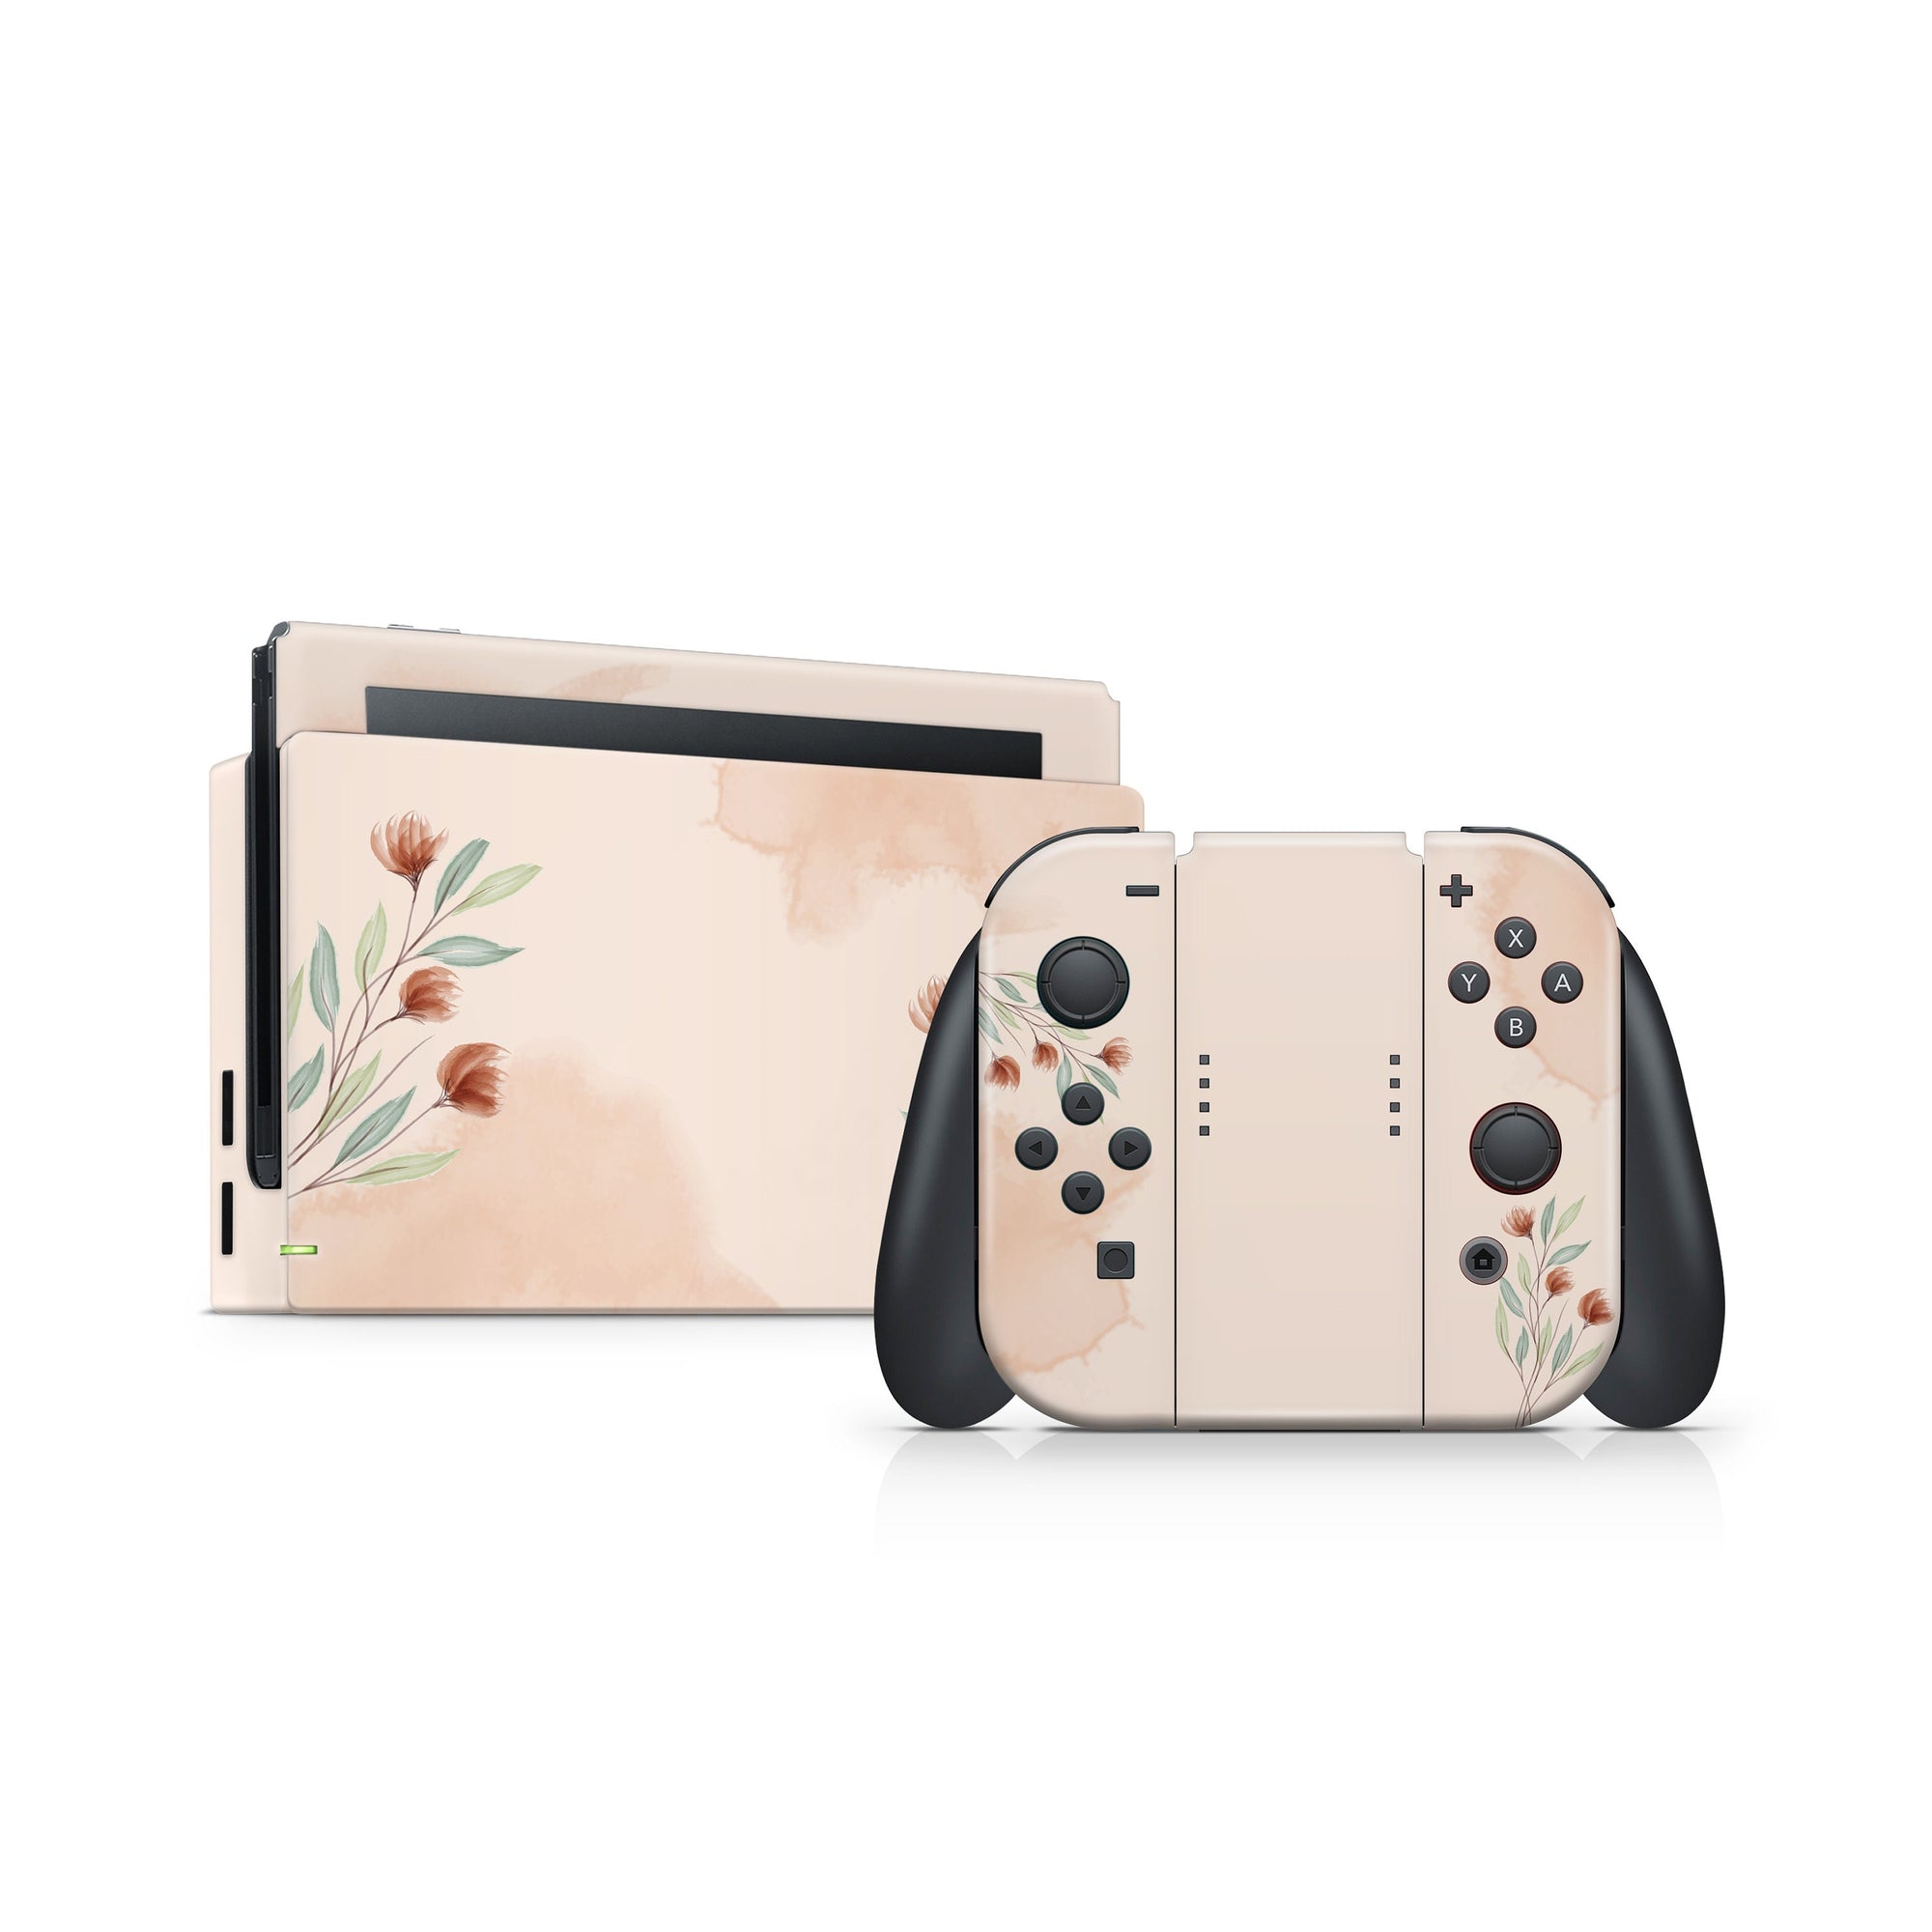 Nintendo switches skin Flower, Gray switch skin Watercolor skin Premium Vinyl 3M Decal Stickers Full Cover